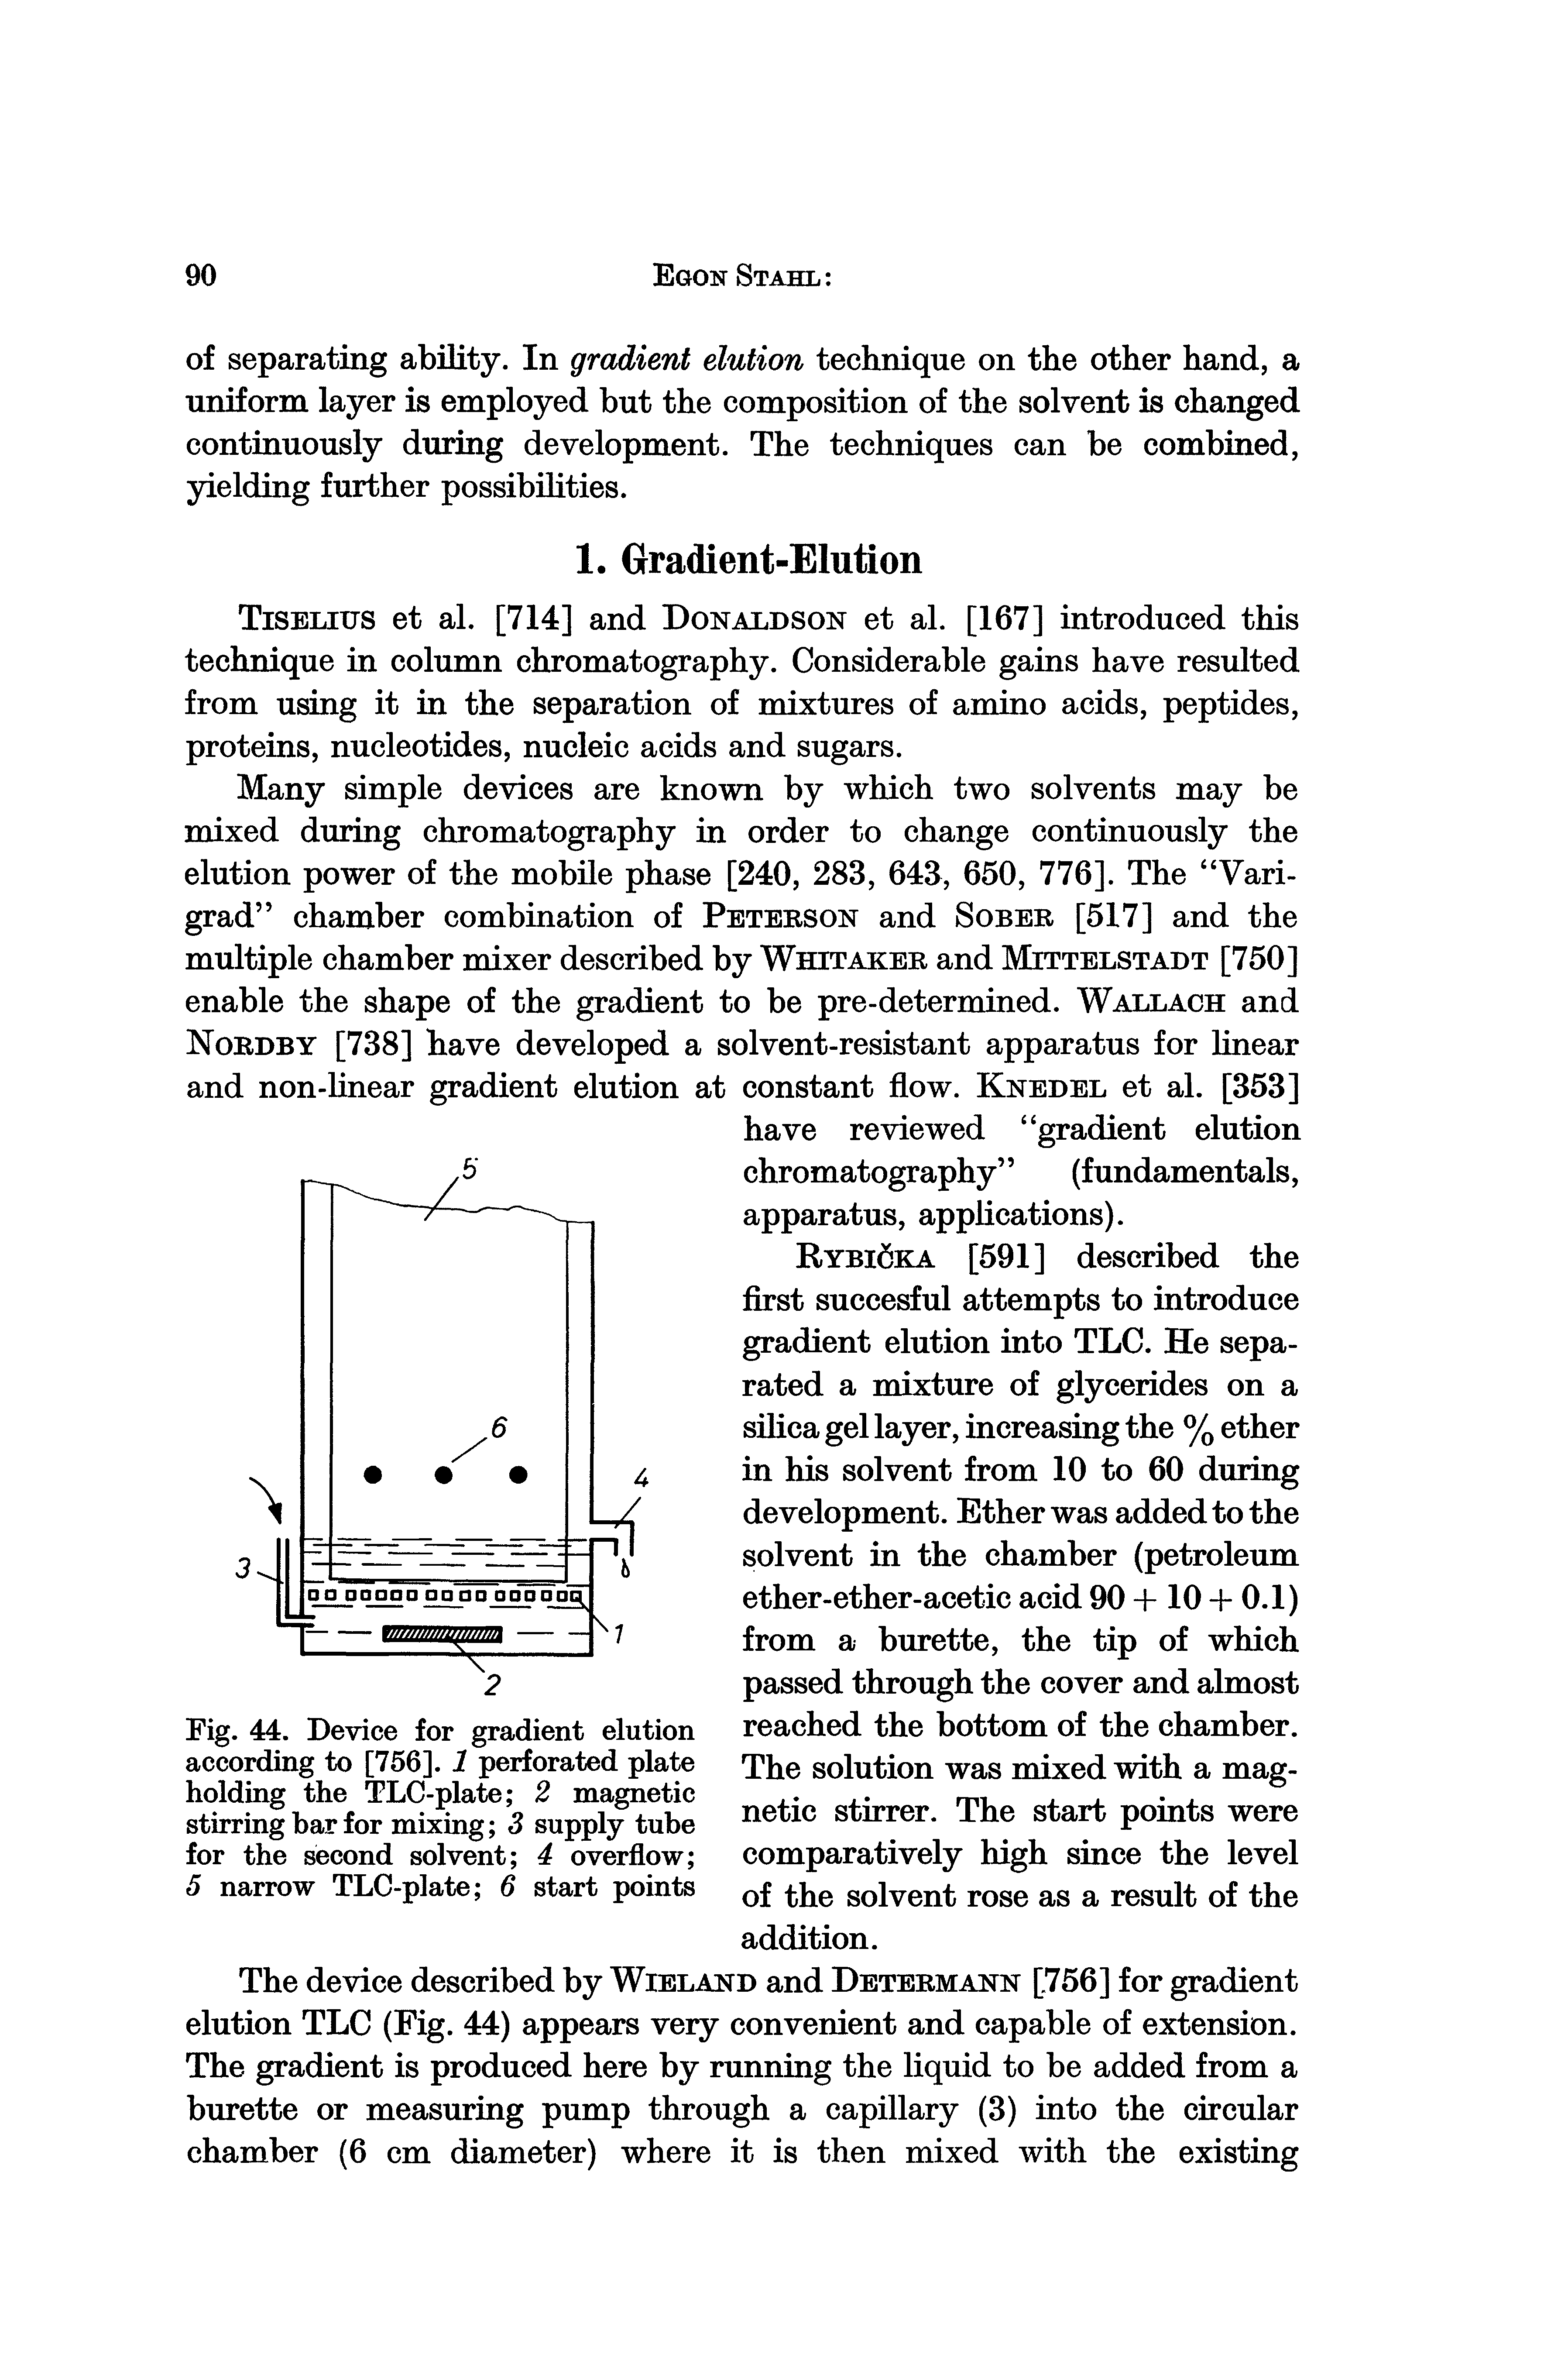 Fig. 44. Device for gradient elution according to [756]. 1 perforated plate holding the TLC-plate 2 magnetic stirring bar for mixing S supply tube for the second solvent 4 overflow 5 narrow TLC-plate 6 start points...